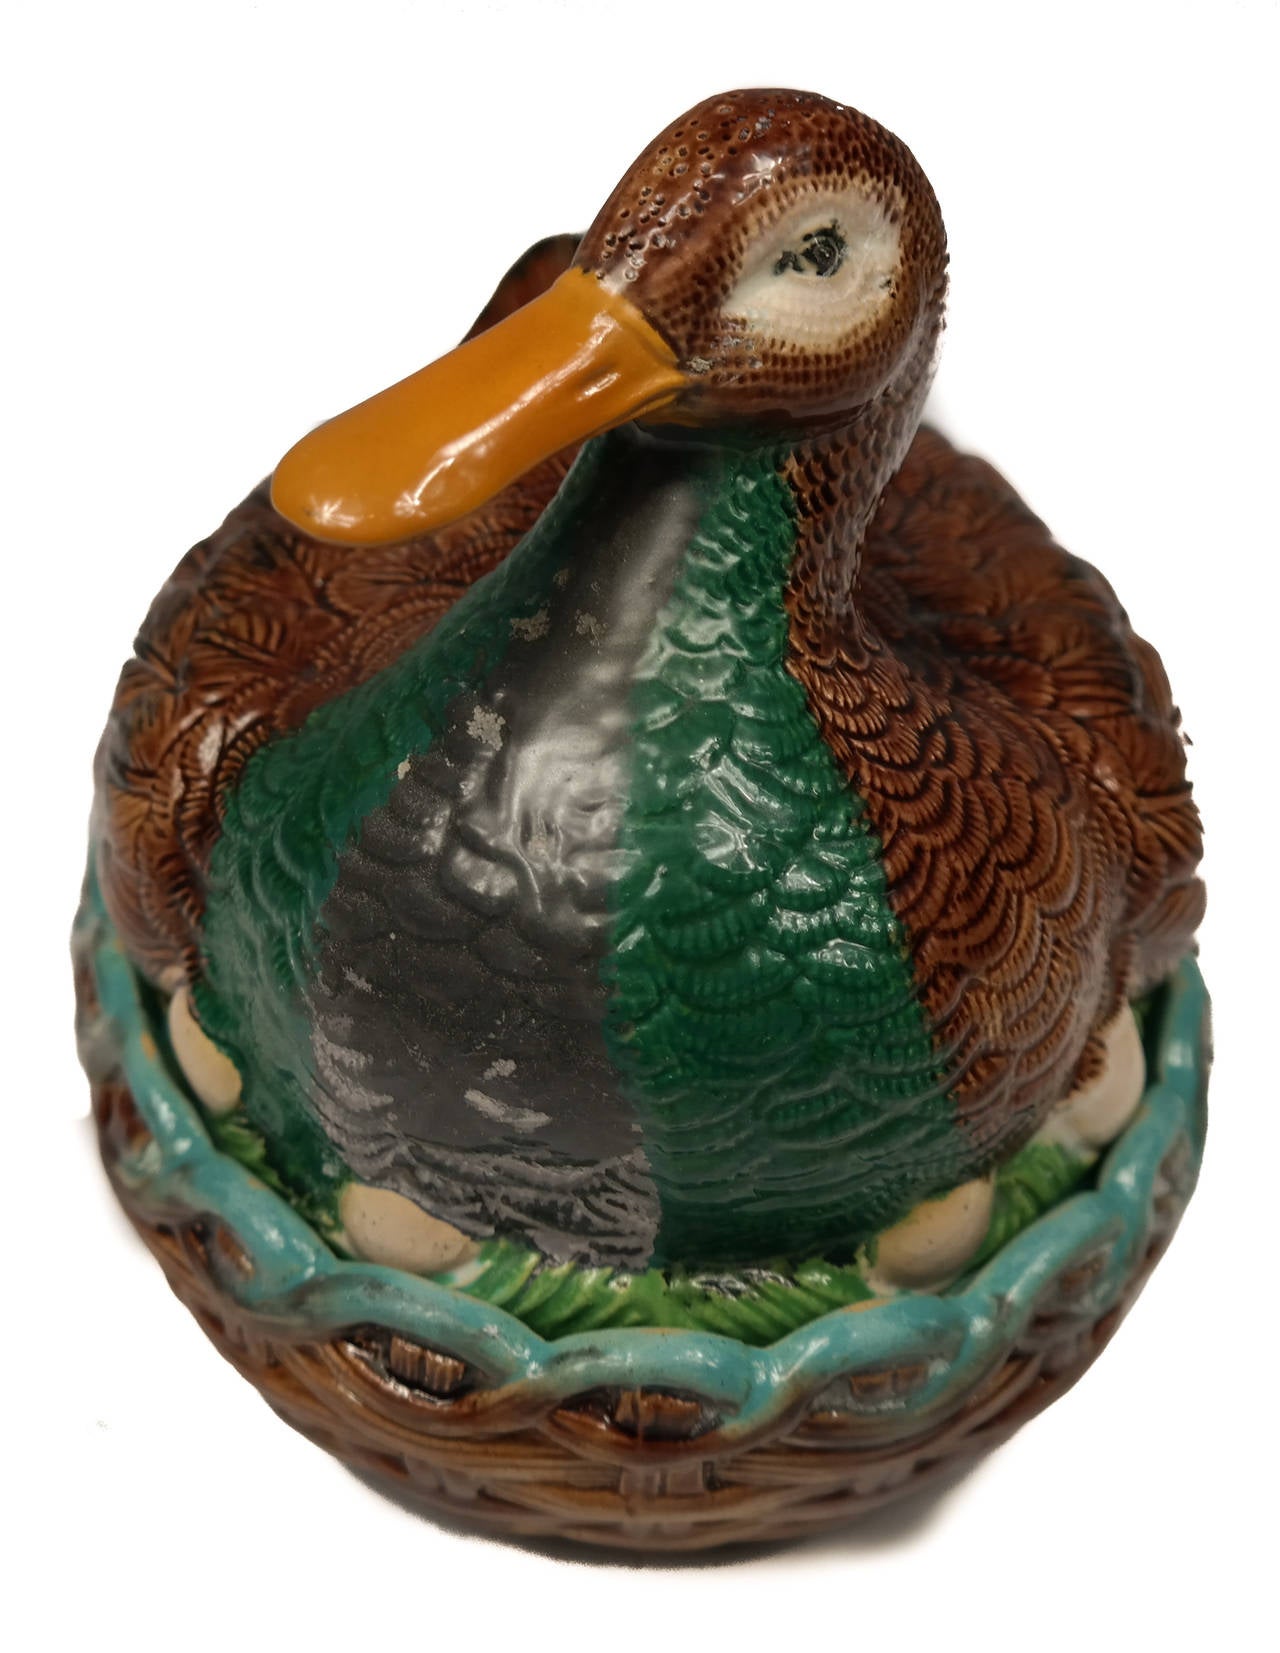 Extremely rare William Brownfield duck-on-nest tureen, English, ca. 1875